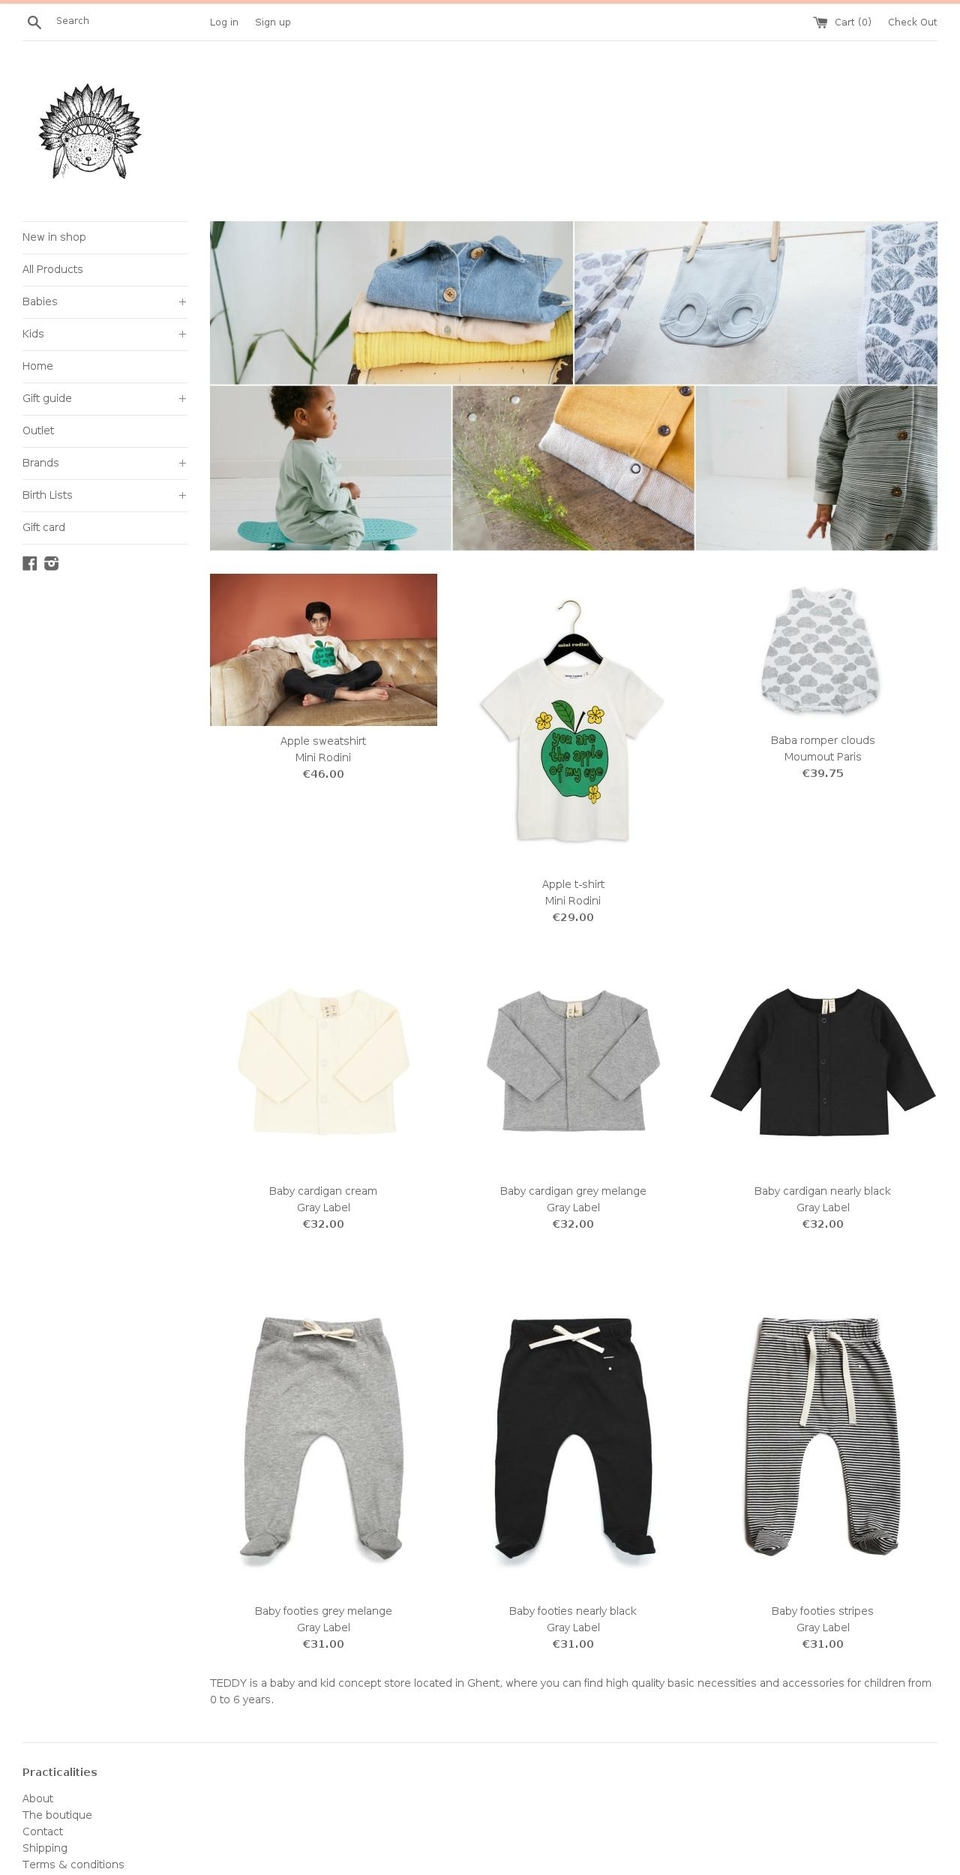 Teddy Shopify theme site example helloteddy.be